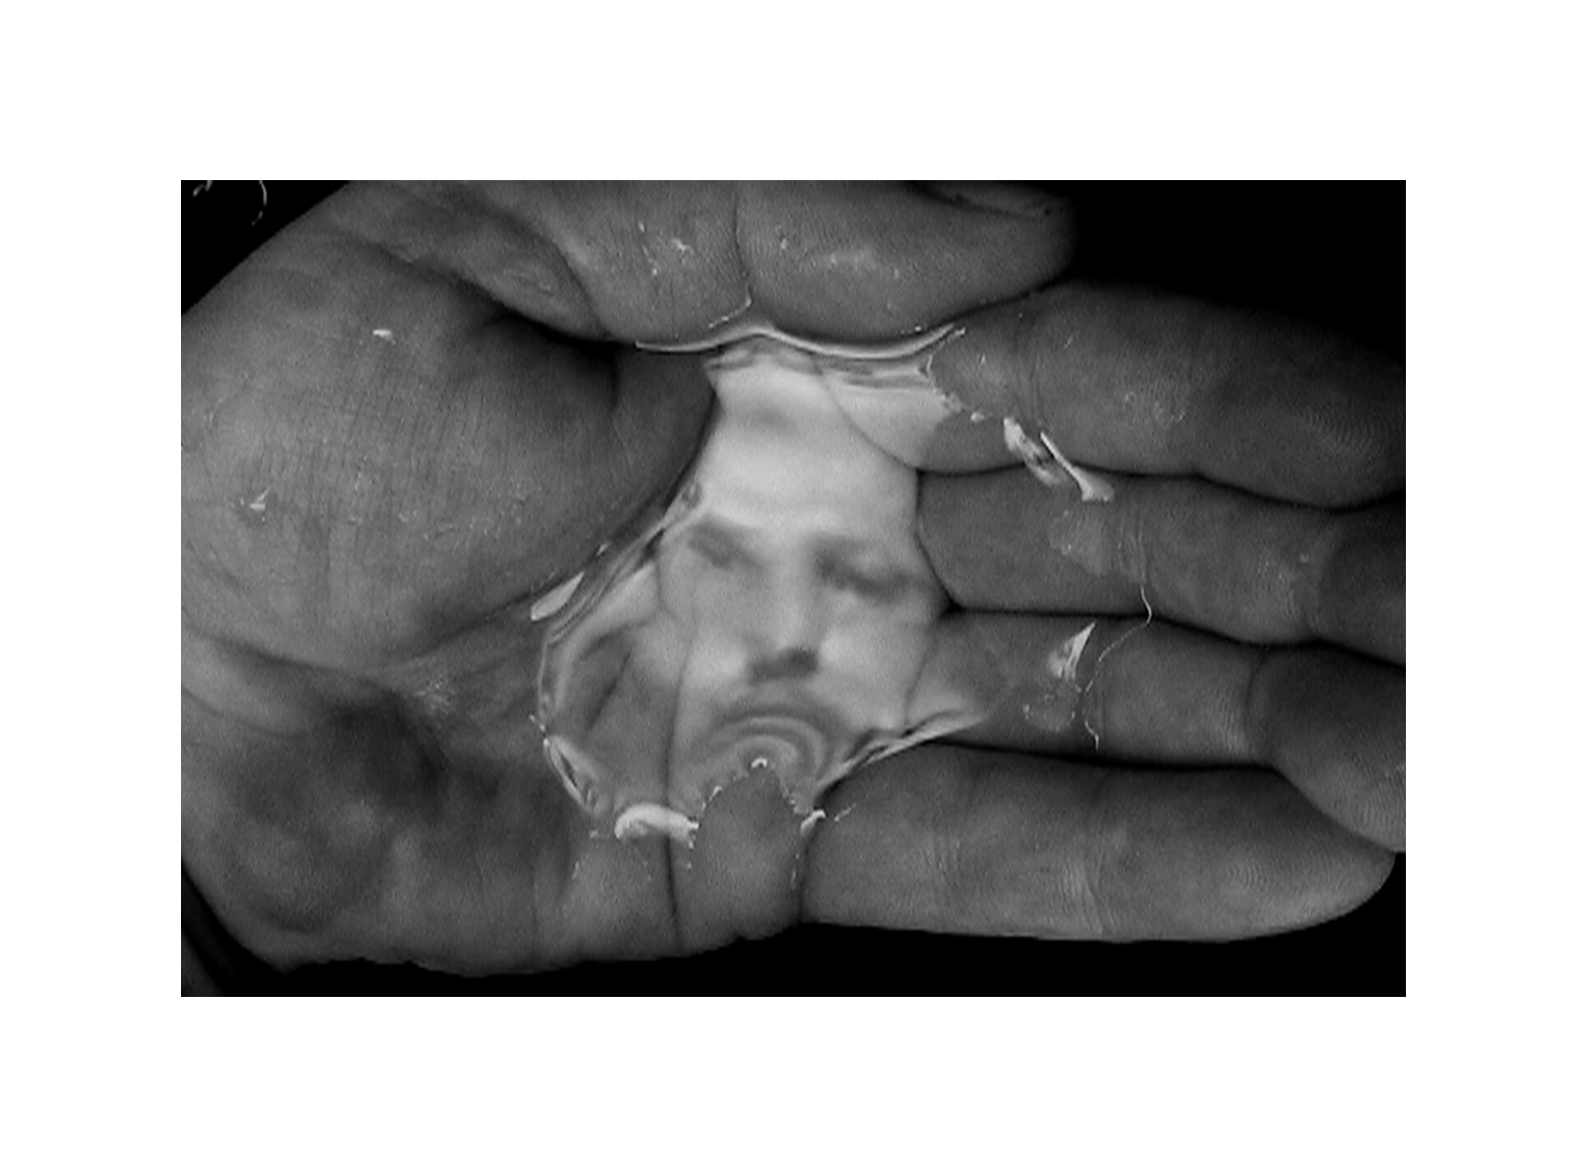 A hand holding some water which casts a reflection of a man's face.